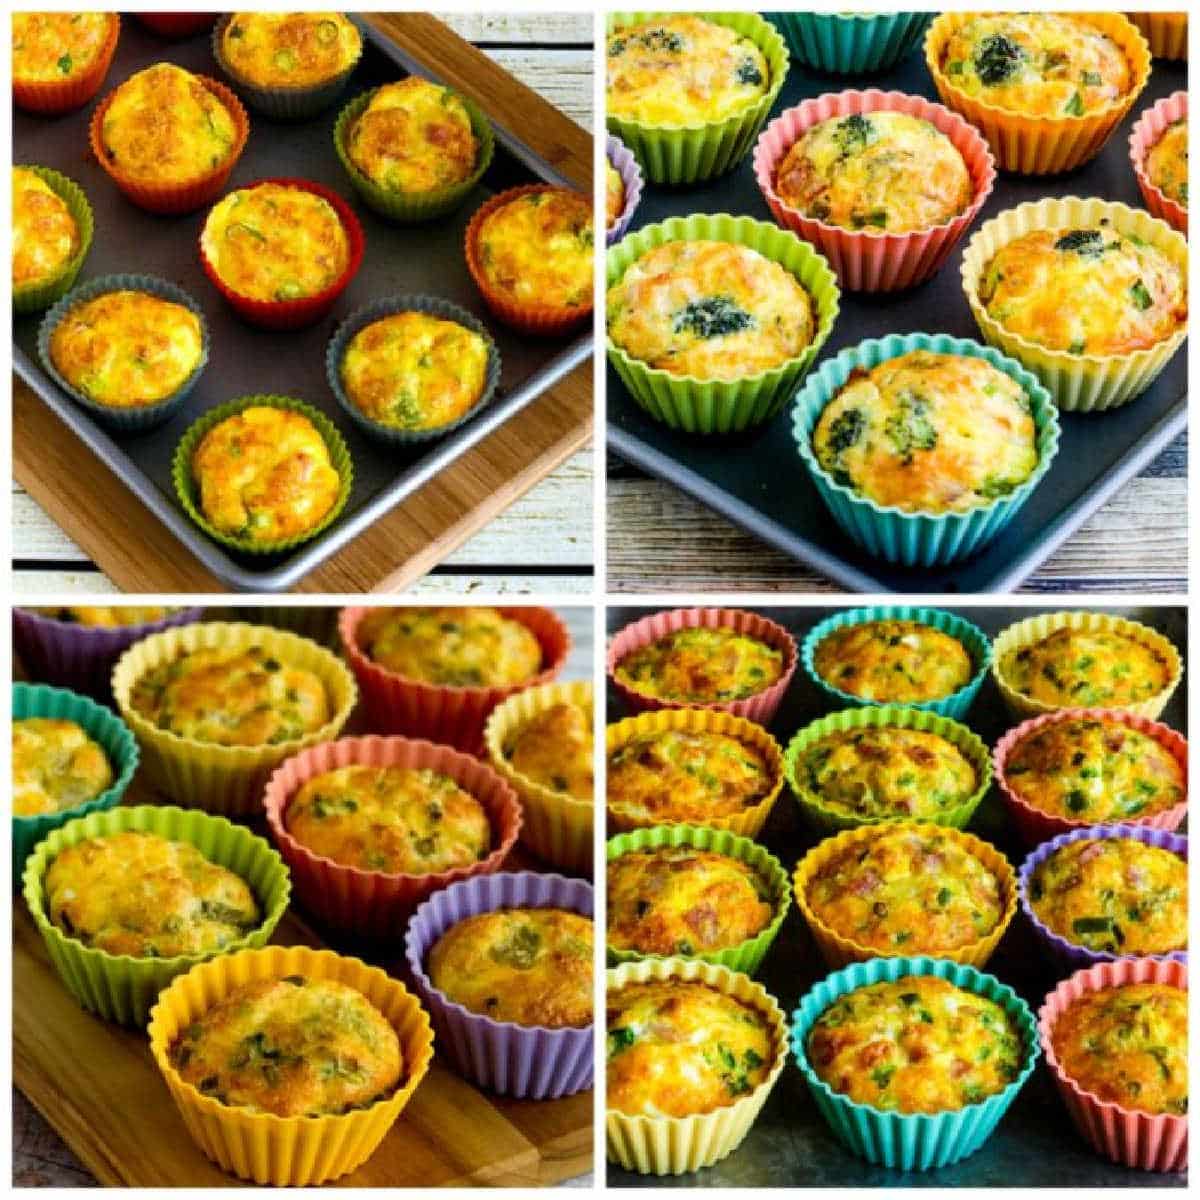 Keto Egg Muffins collage showing egg muffin recipe variations